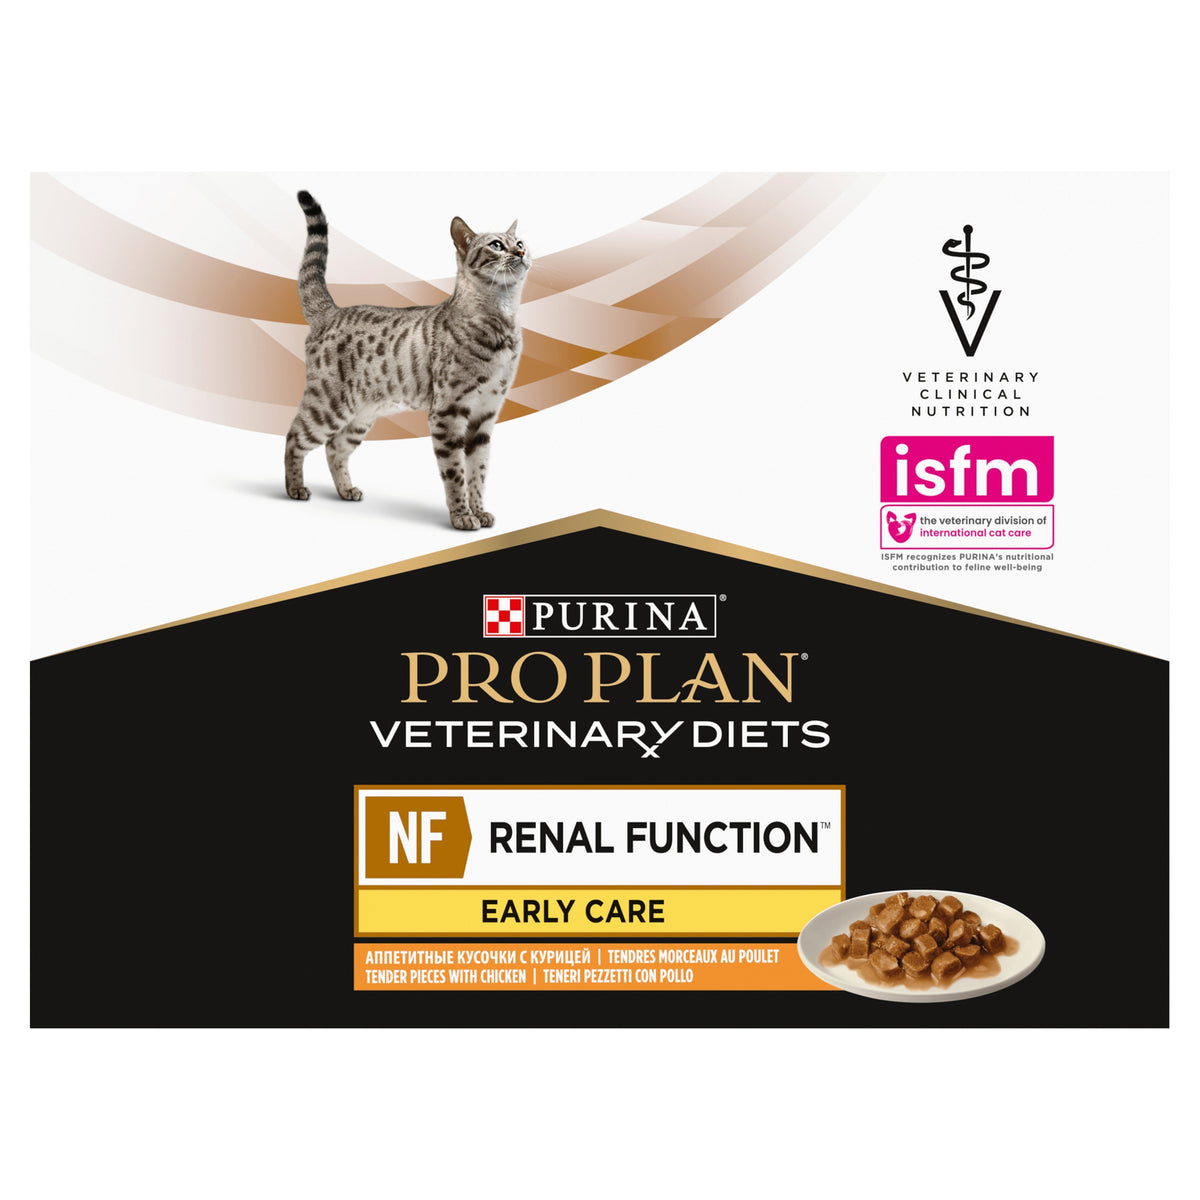 PURINA® PRO PLAN® Veterinary Diets - Feline NF Early Care Renal Function - Chicken Tender Pieces